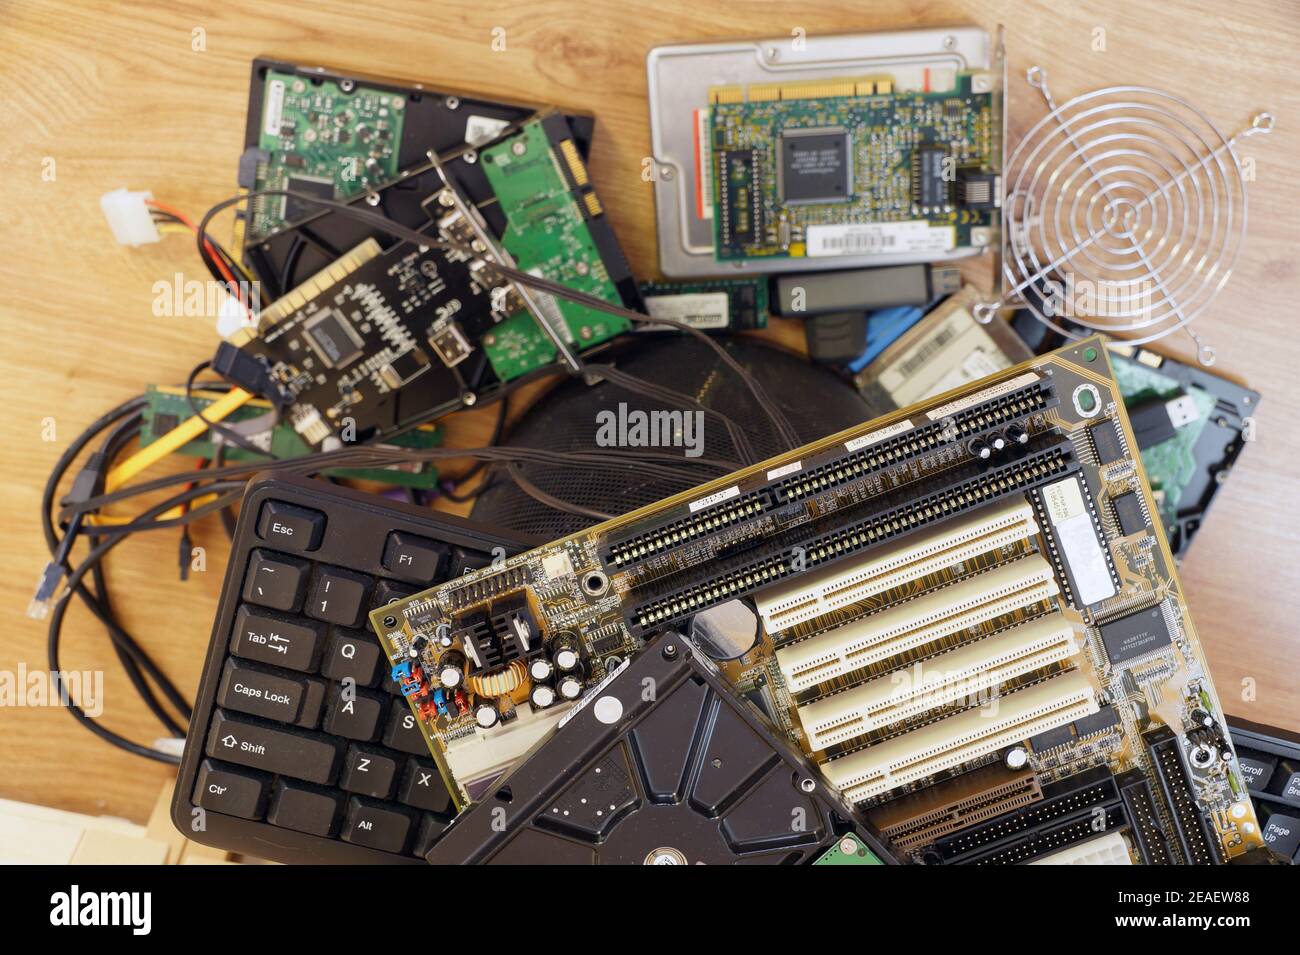 In the garbage bin: used, unnecessary, parts and computer components intended for discarding. Stock Photo